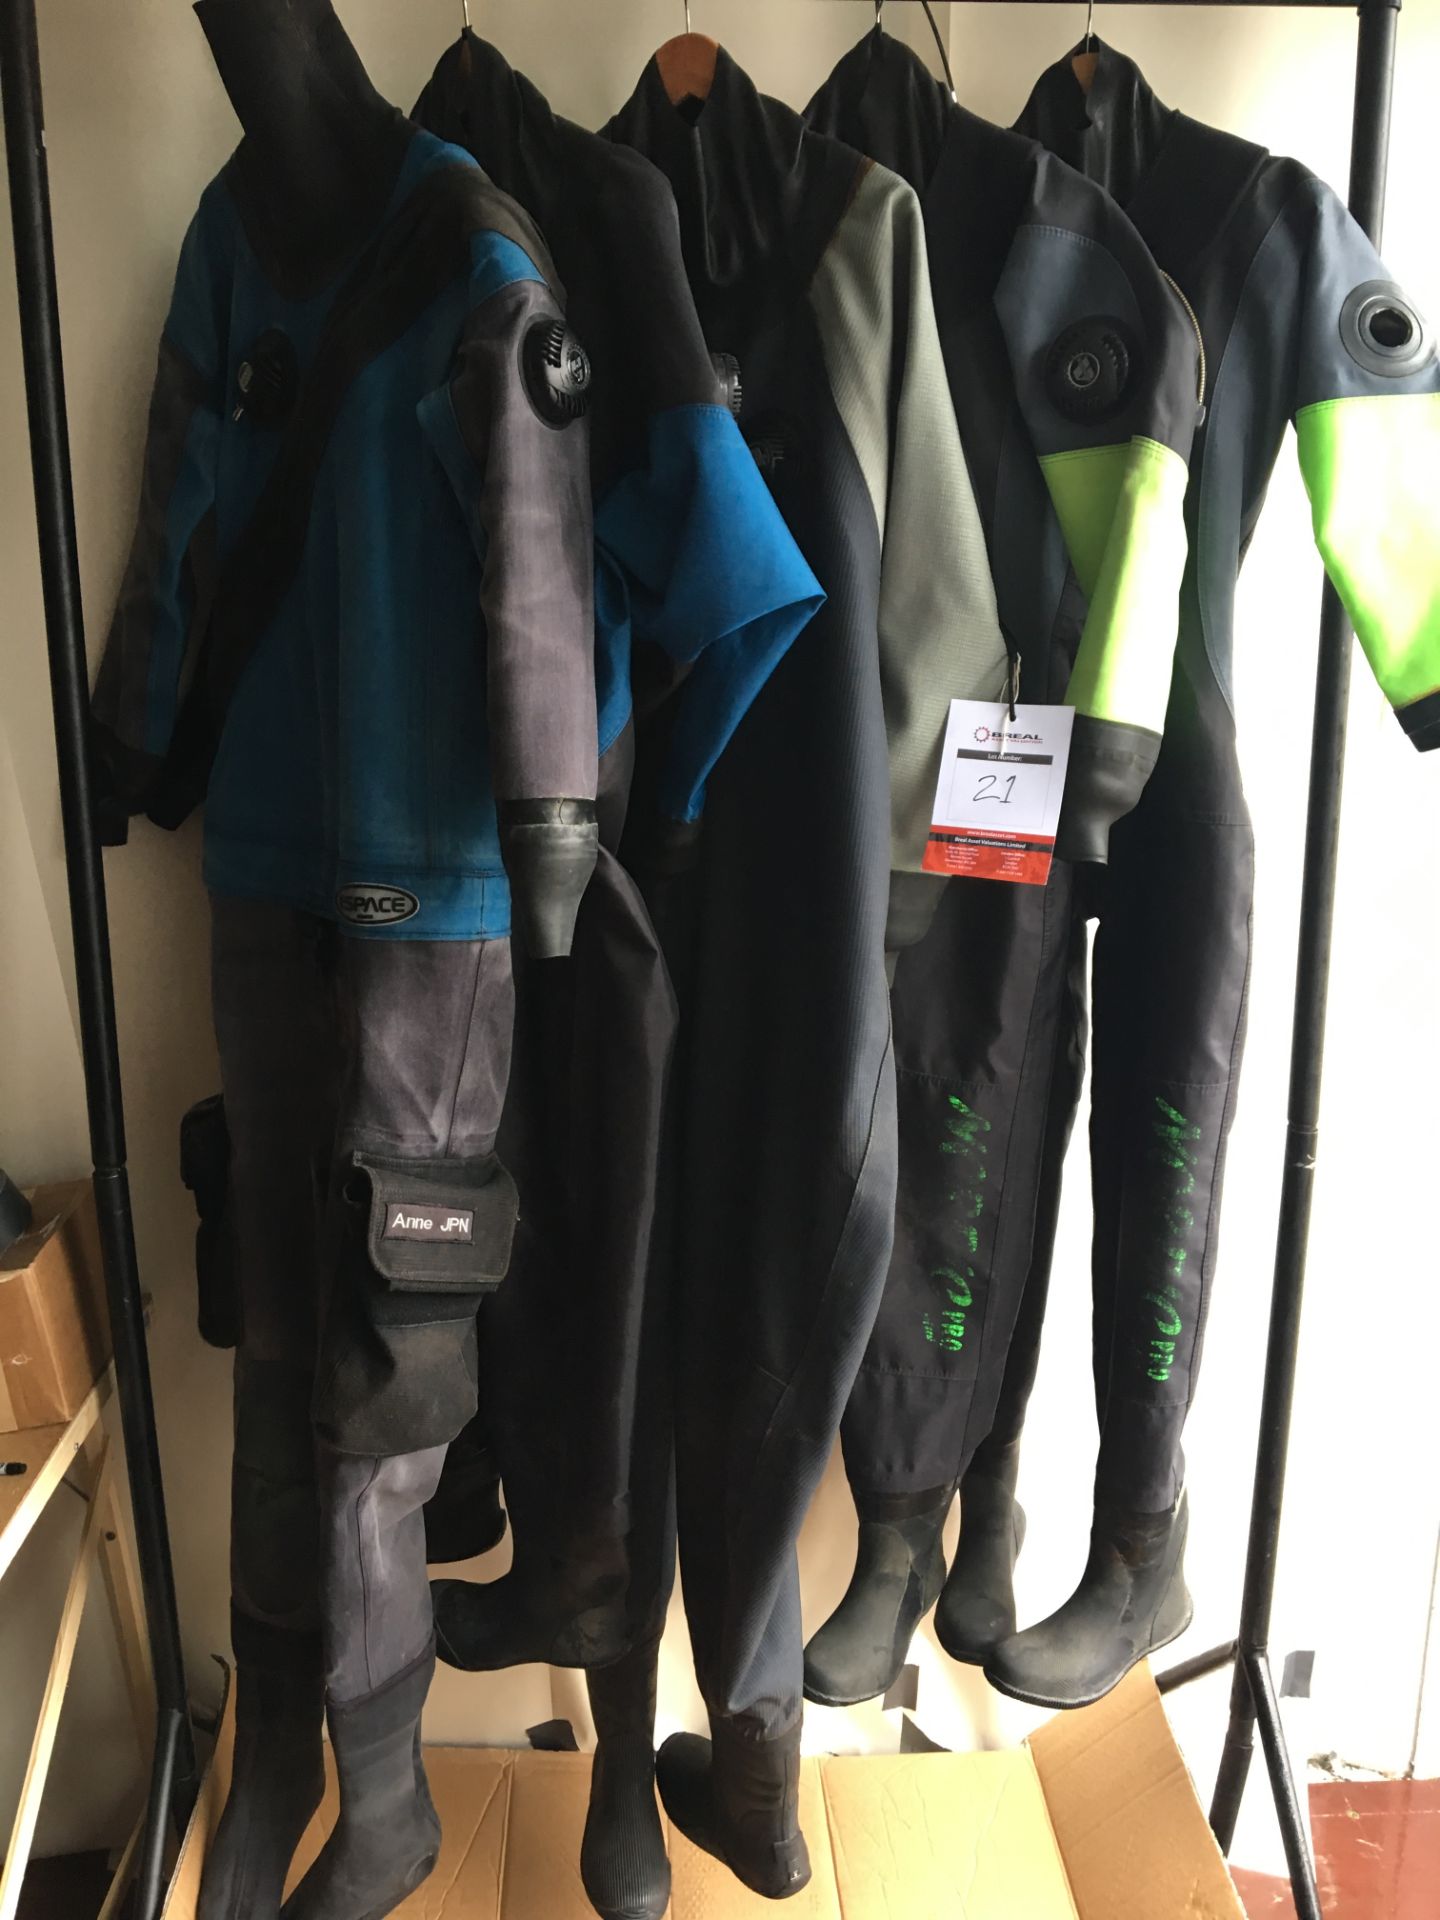 5 x Various Dry Suits, used for training